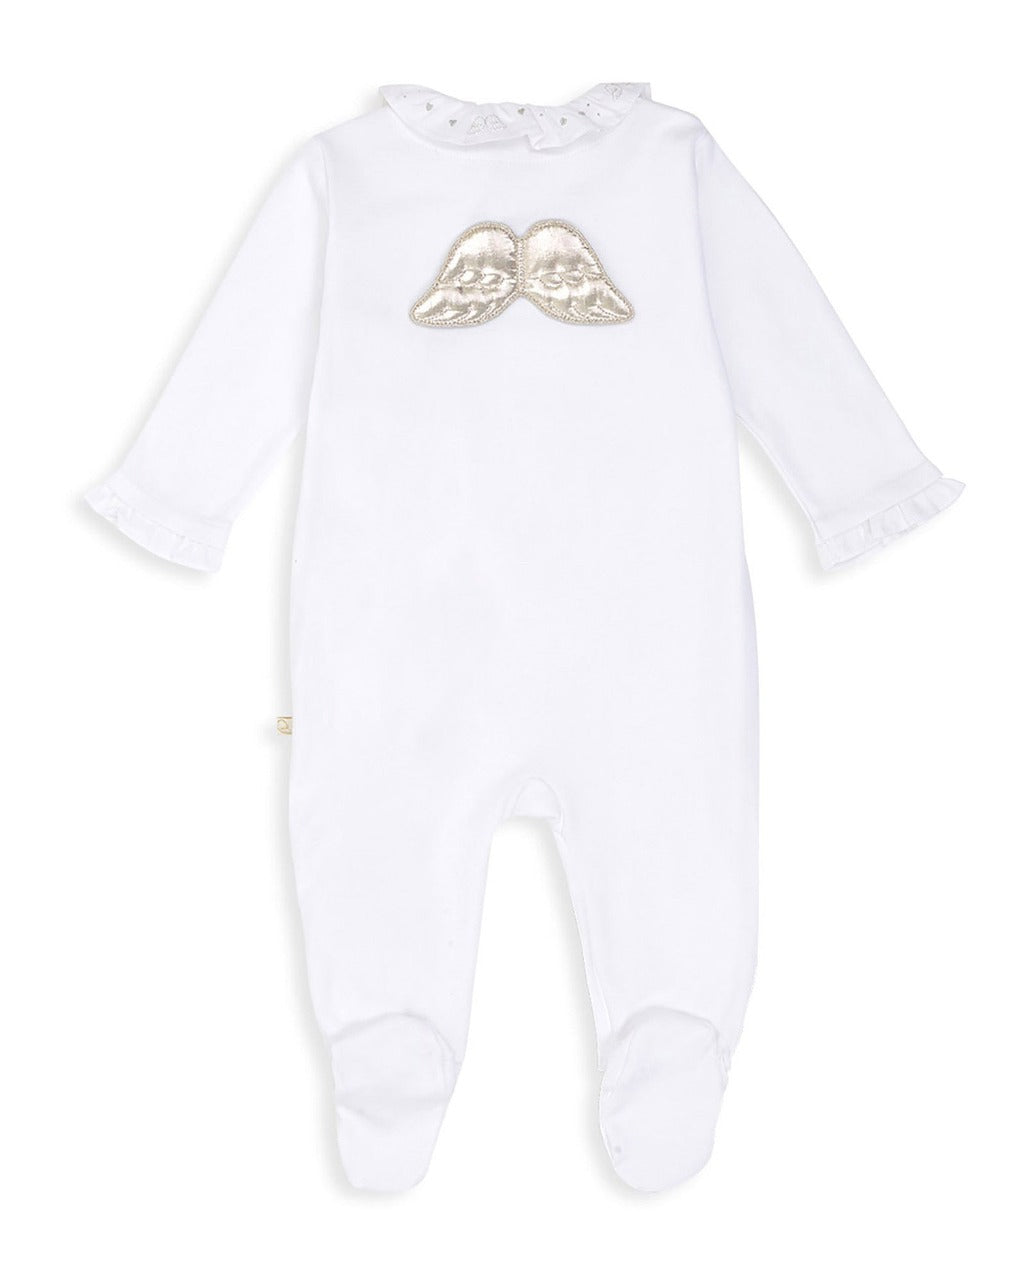 white prima cotton sleepsuit with ruffle embroidered collar and silver angel wings 